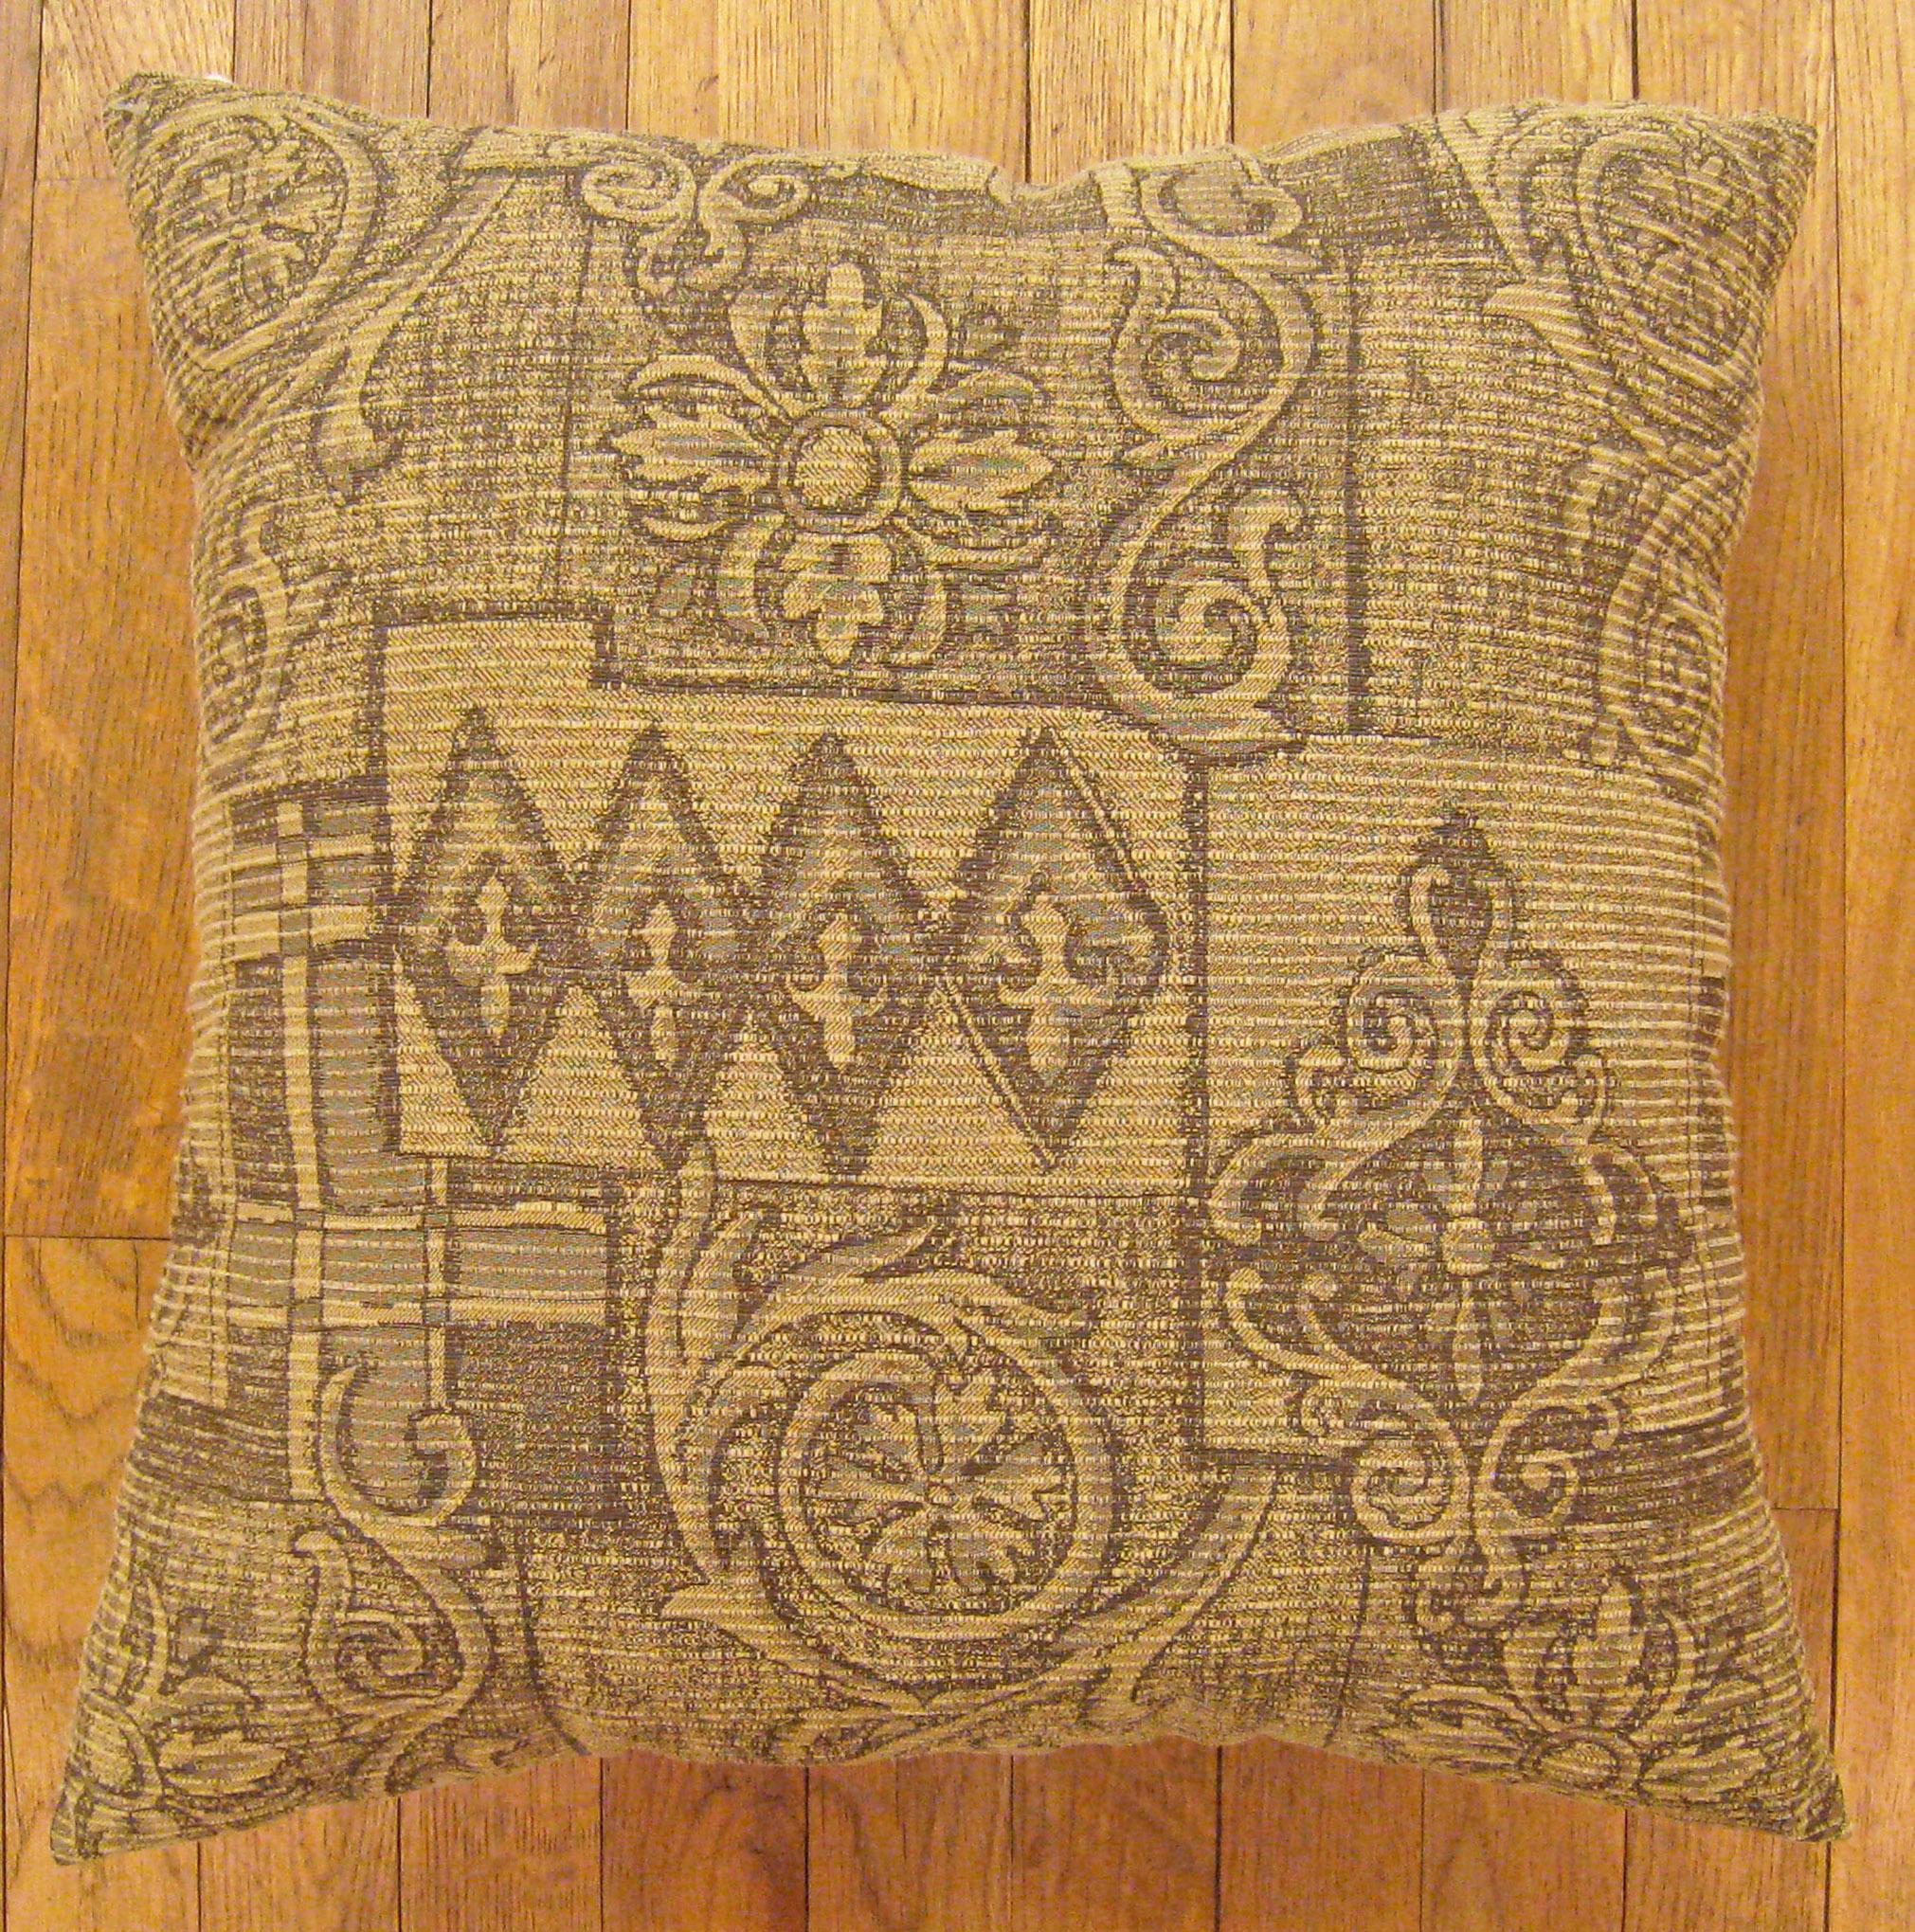 Vintage Floro-geometric fabric pillow; size 1'8” x 1'6”.

A vintage american pillow with geometric abstracts in a beige central field, size 1'8” x 1'6”. This lovely decorative pillow features a vintage fabric of a American floro-geometric style on